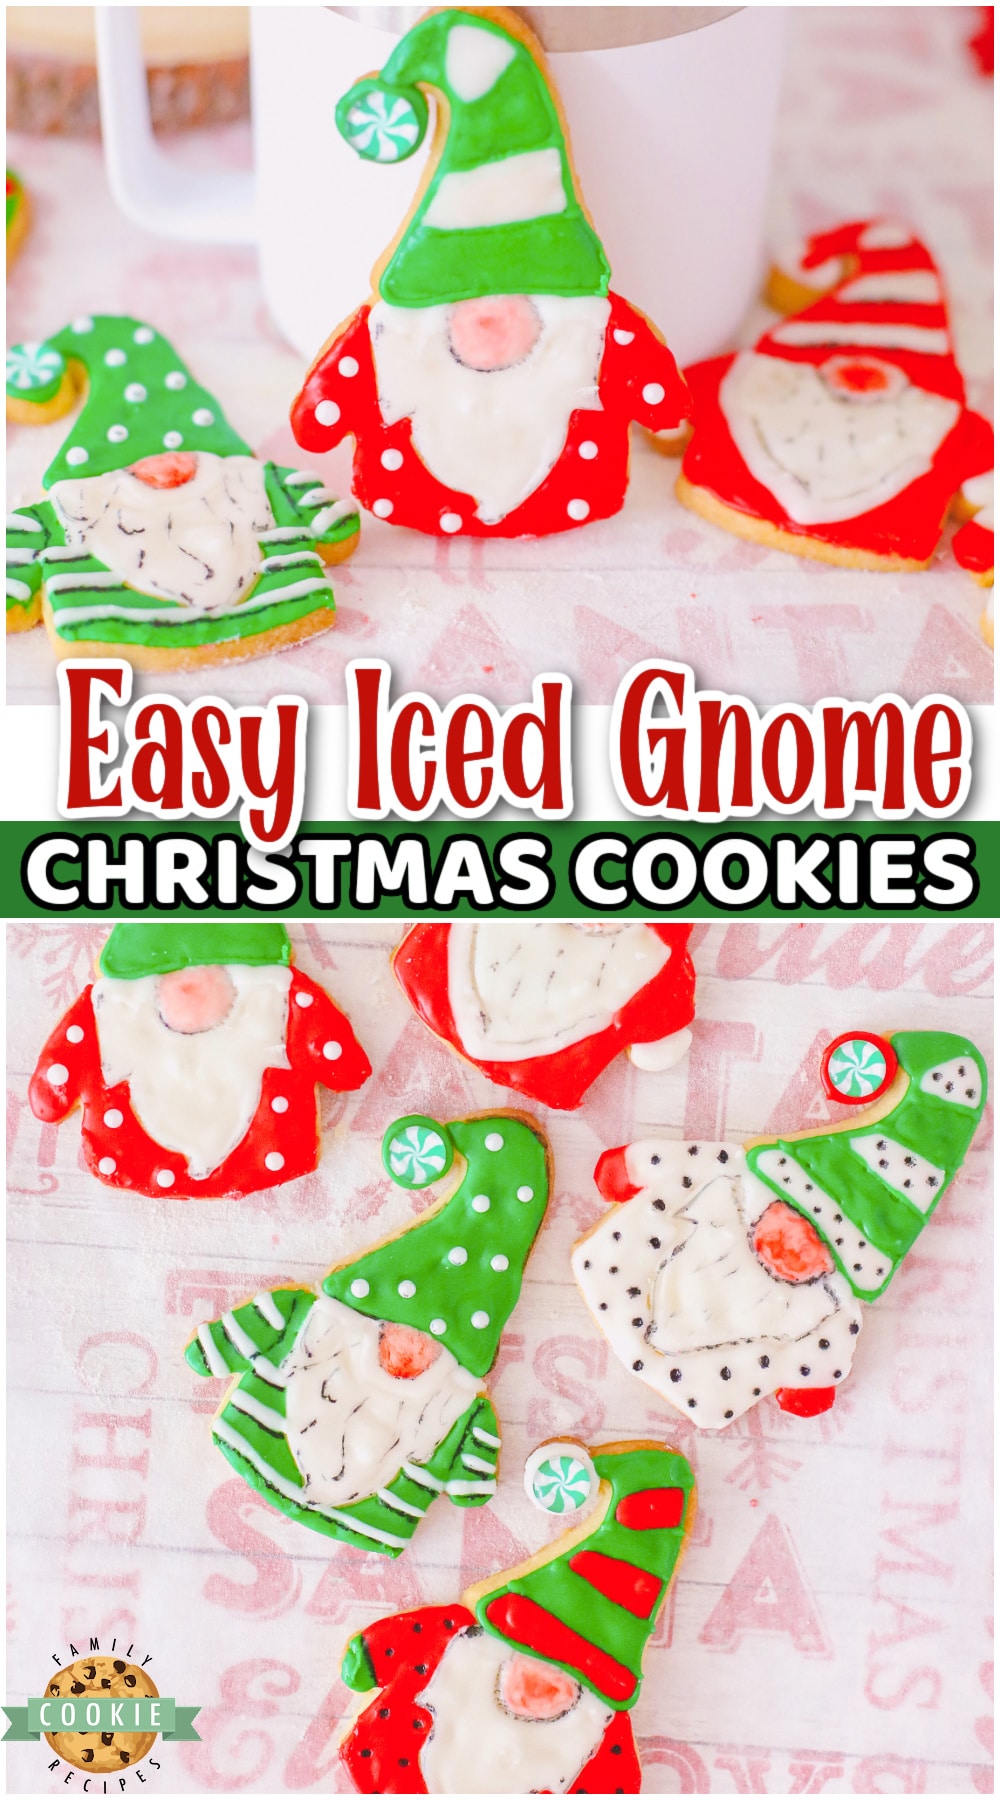 Iced Gnome Cookies made EASY and are ADORABLE! Made with a buttery shortbread & iced to perfection, these magical little gnomes almost come to life!